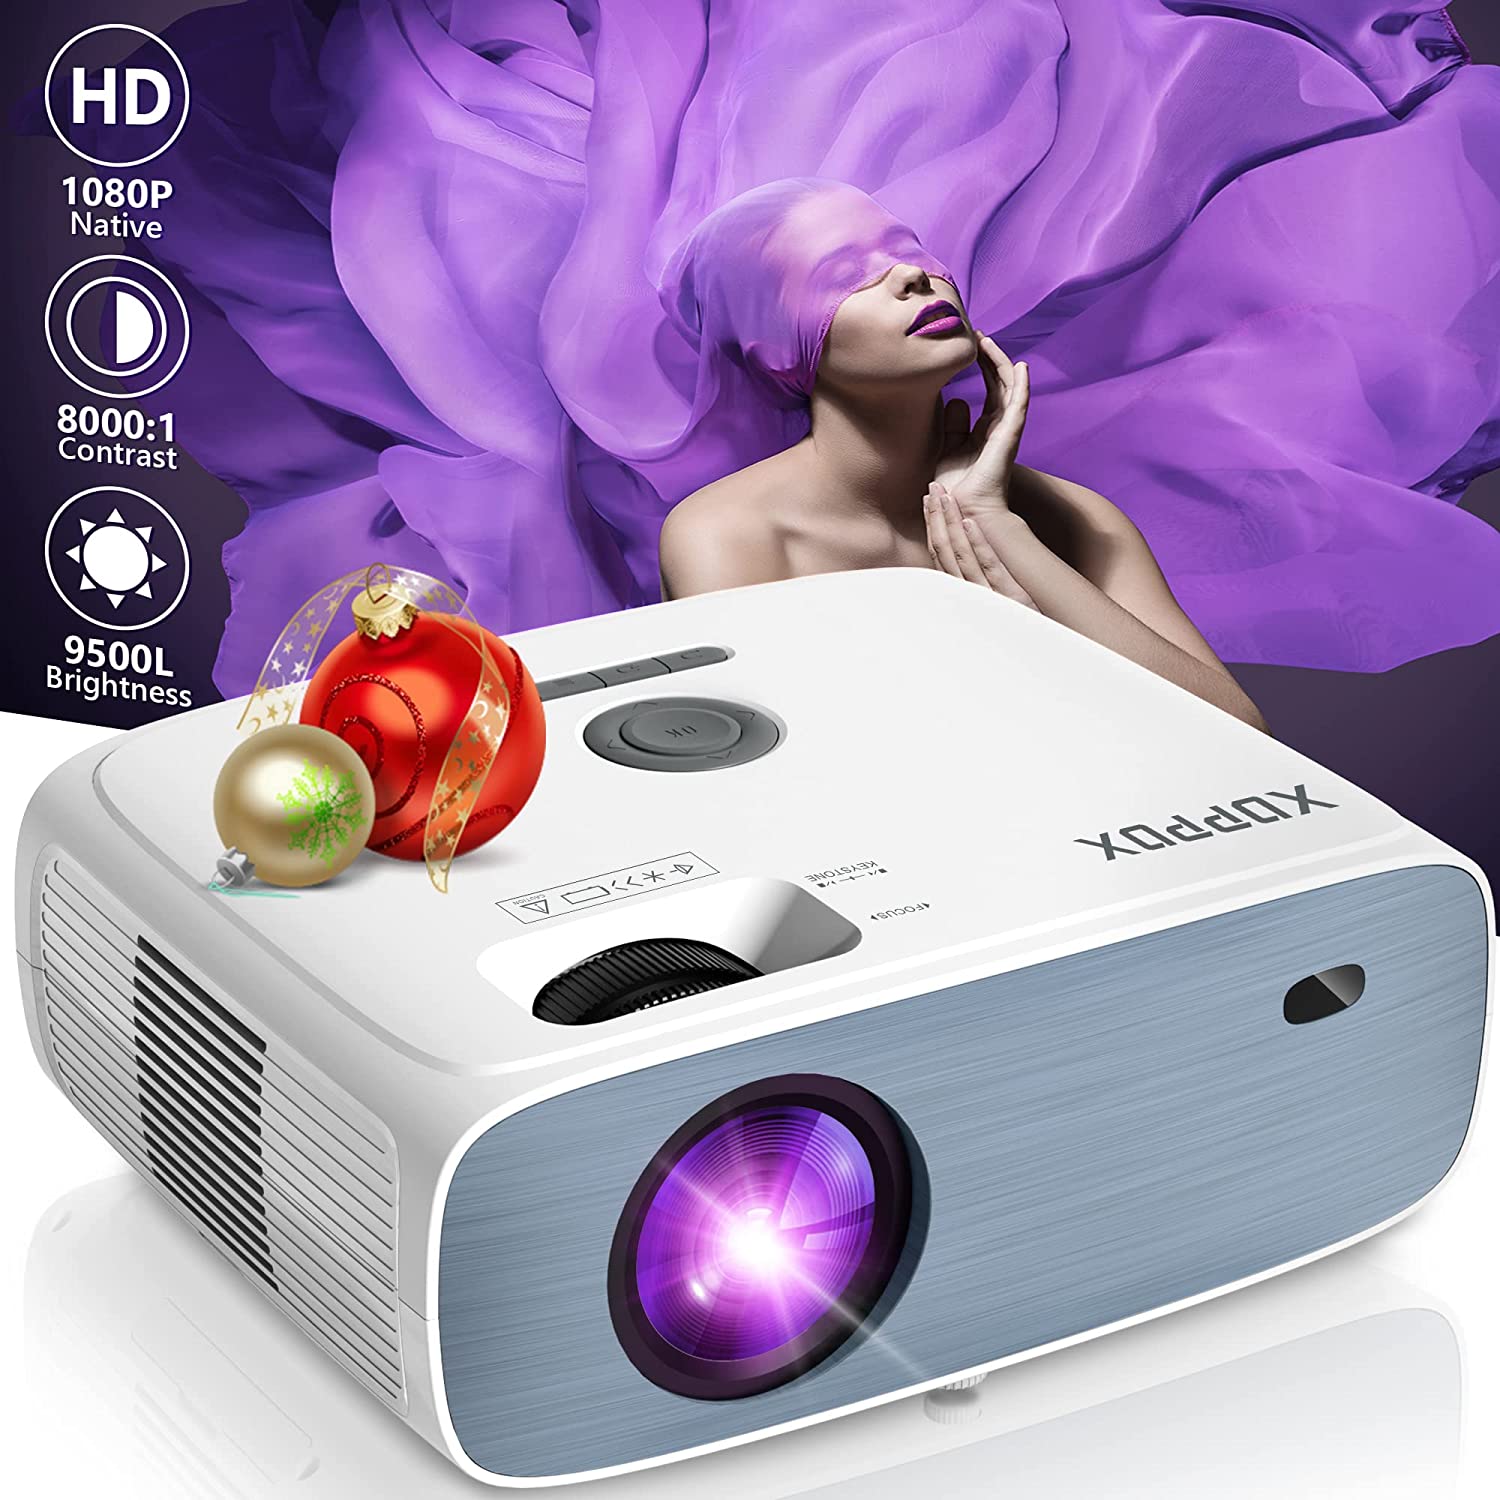 Outdoor Projector 1080P Native, XOPPOX Video Projector Full HD: